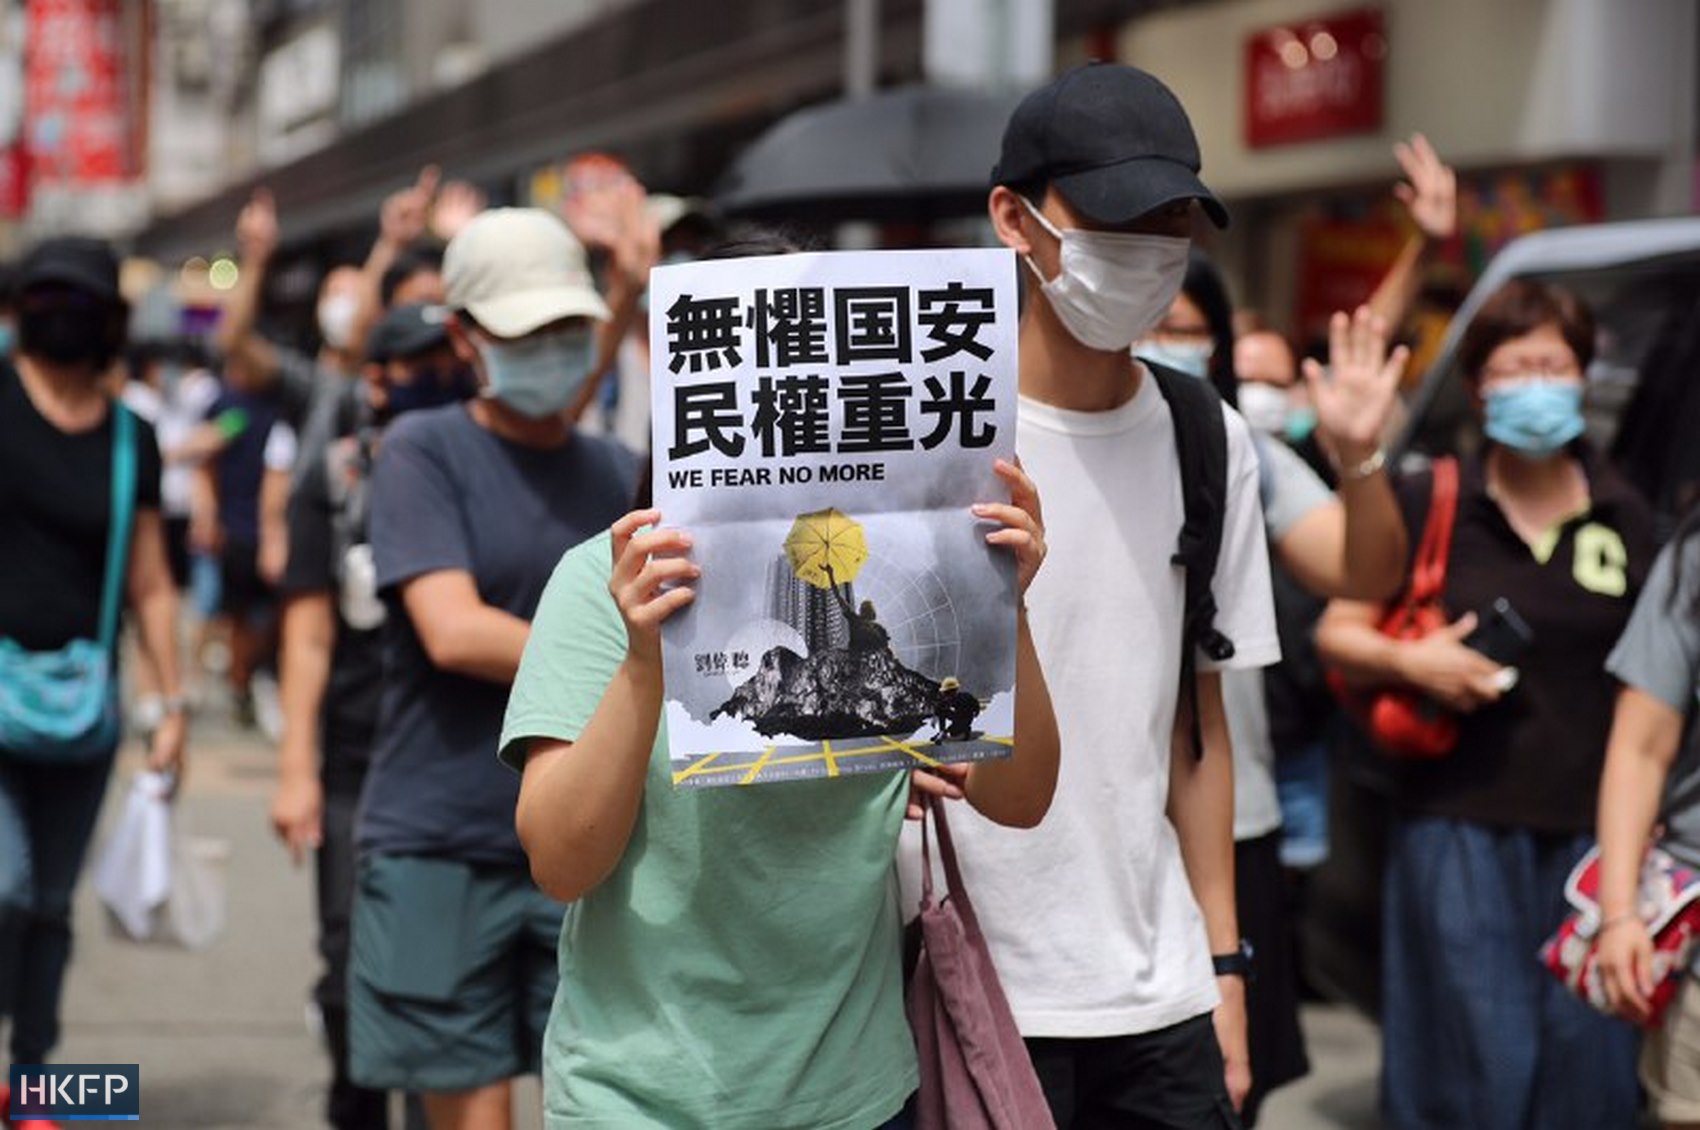 'we fear no more' sign protester causeway bay 1 July 2020